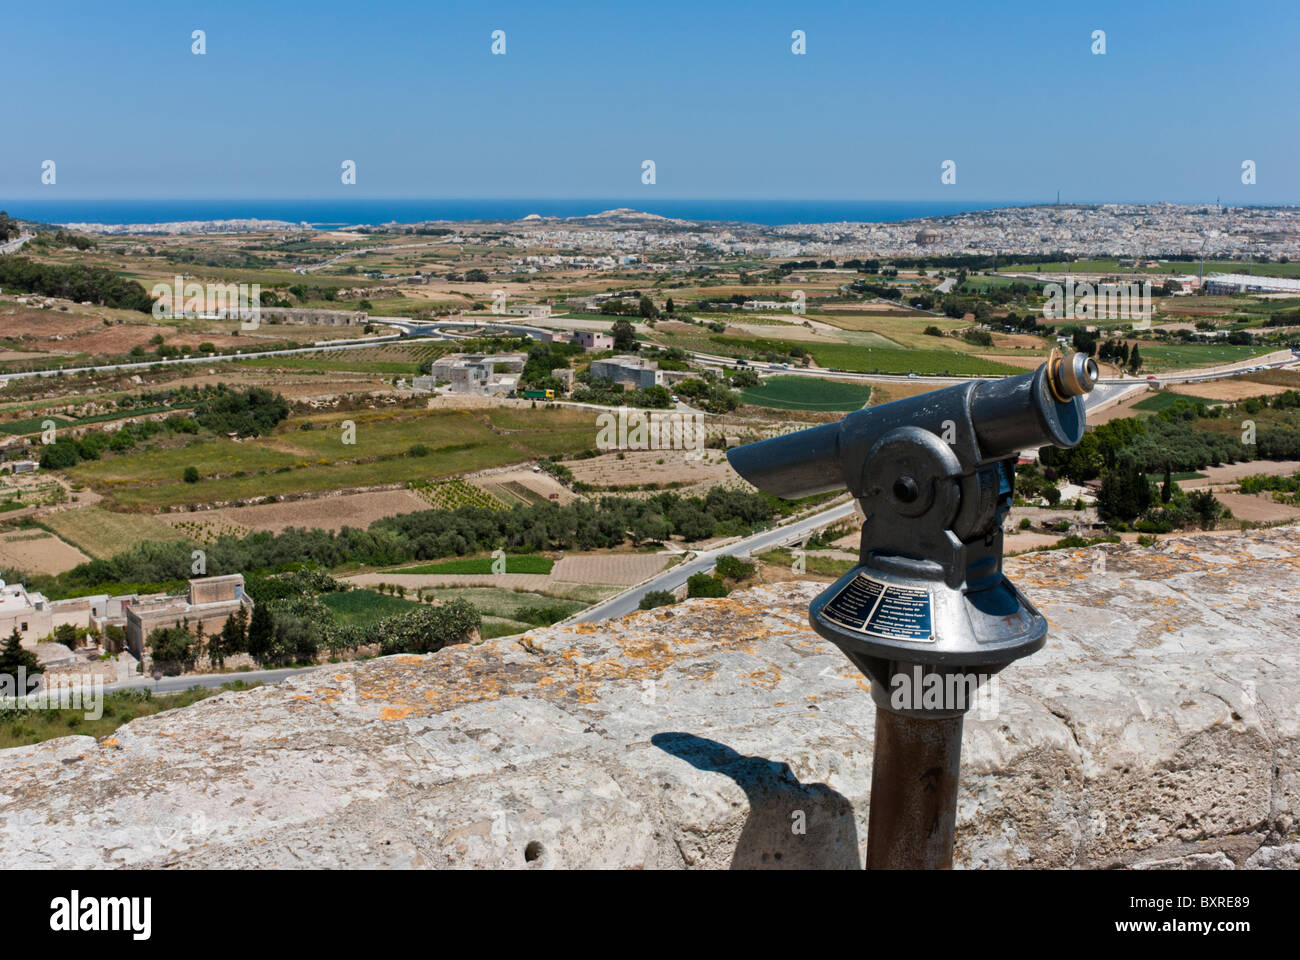 The view from the historic city of Mdina across rural Malta, Europe. Stock Photo